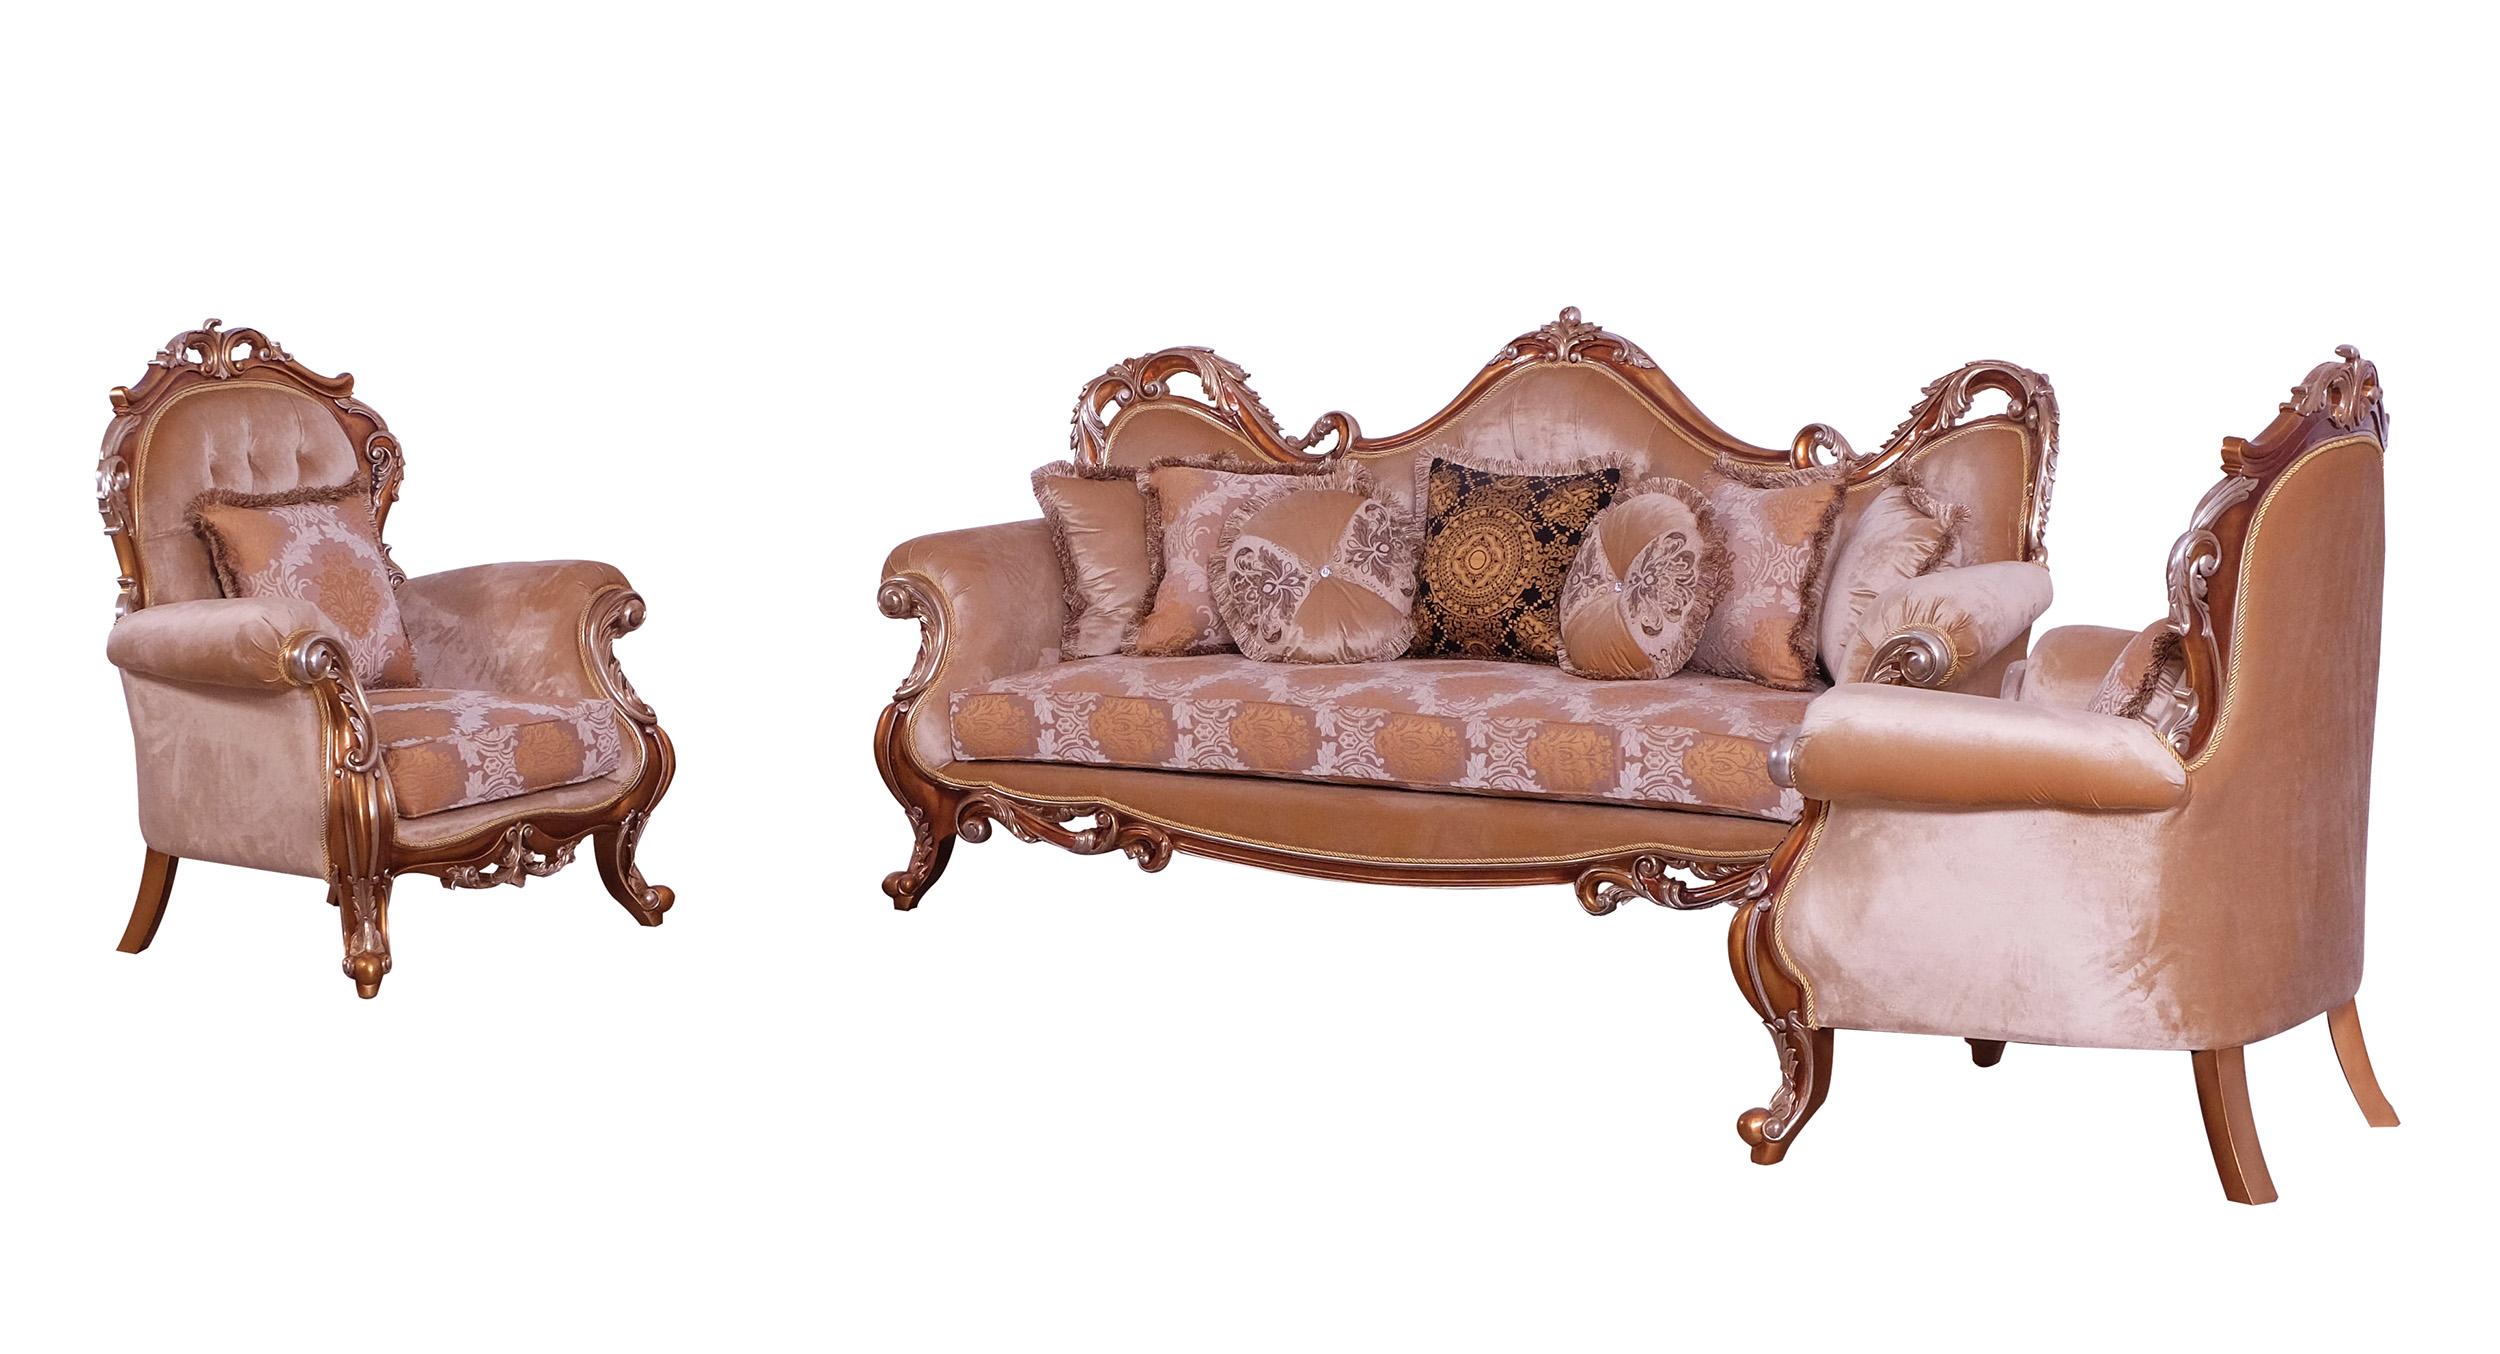 Classic, Traditional Sofa Set TIZIANO 38994-Set-3 in Antique, Silver, Gold, Brown Fabric